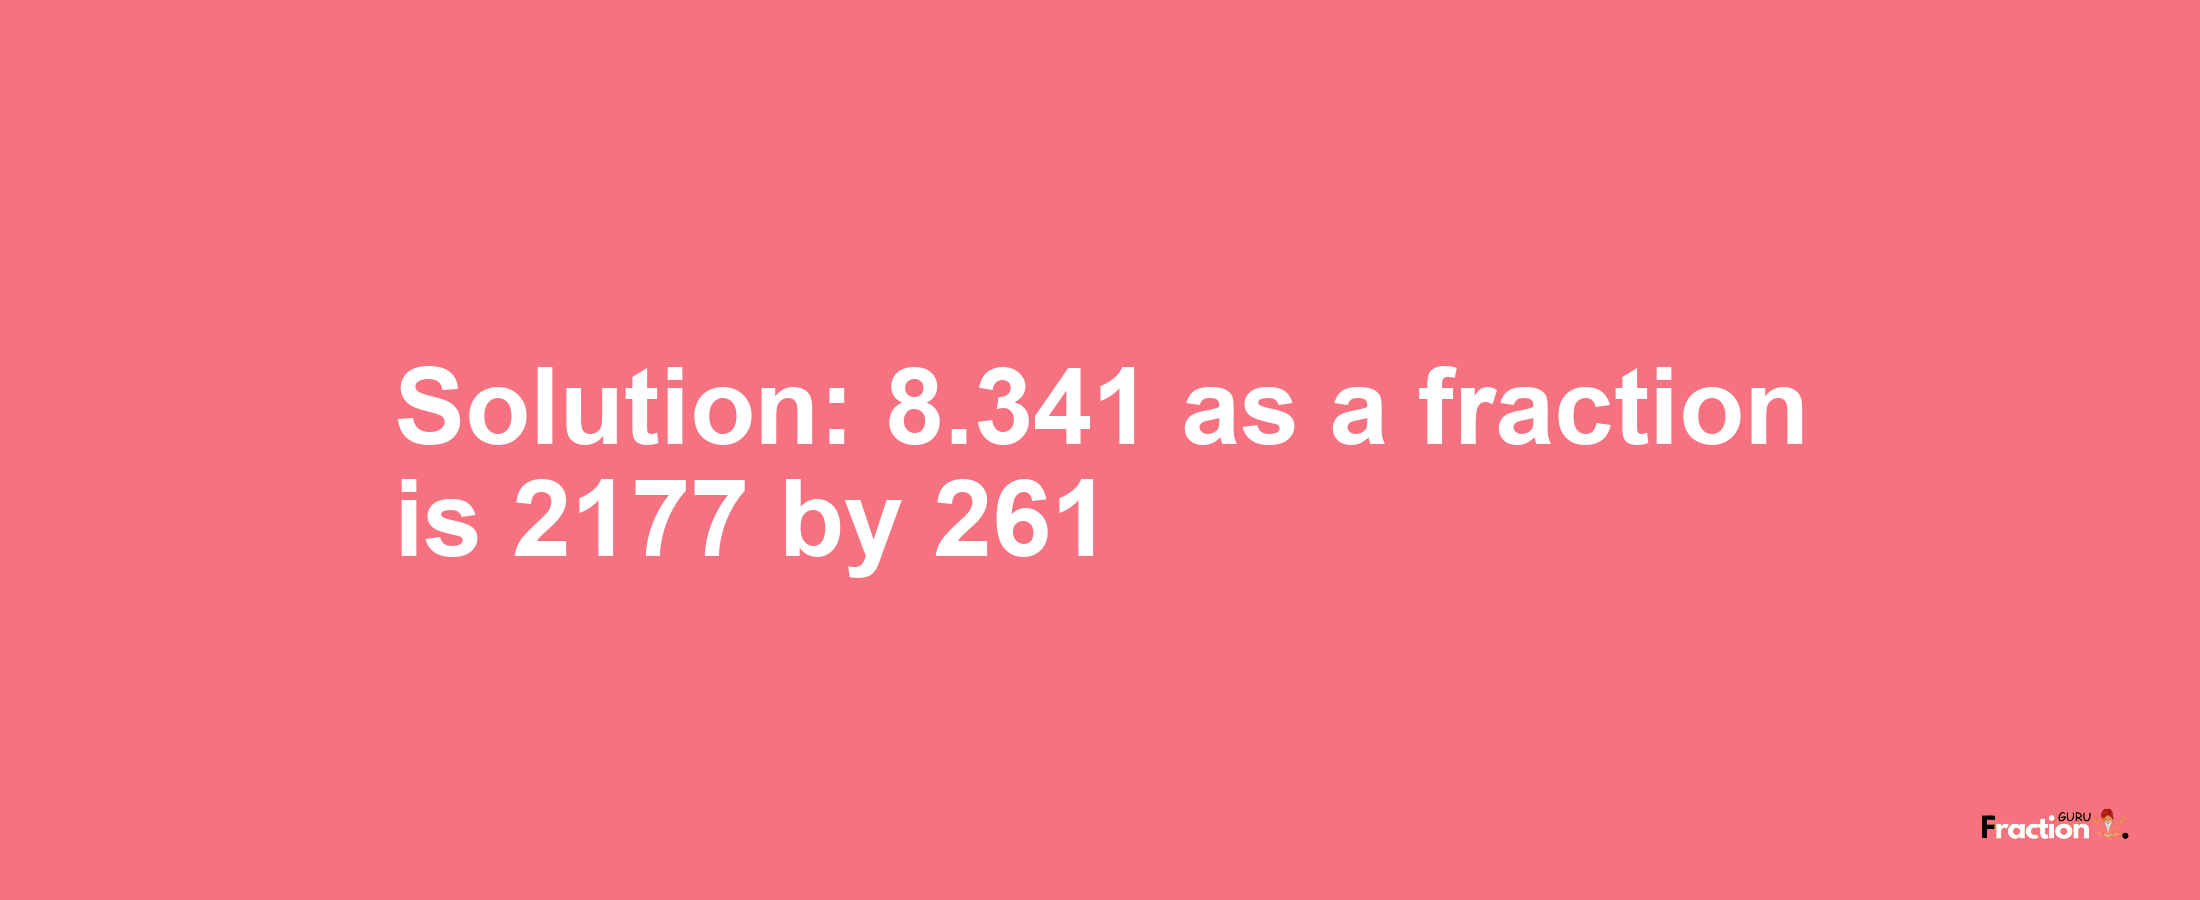 Solution:8.341 as a fraction is 2177/261